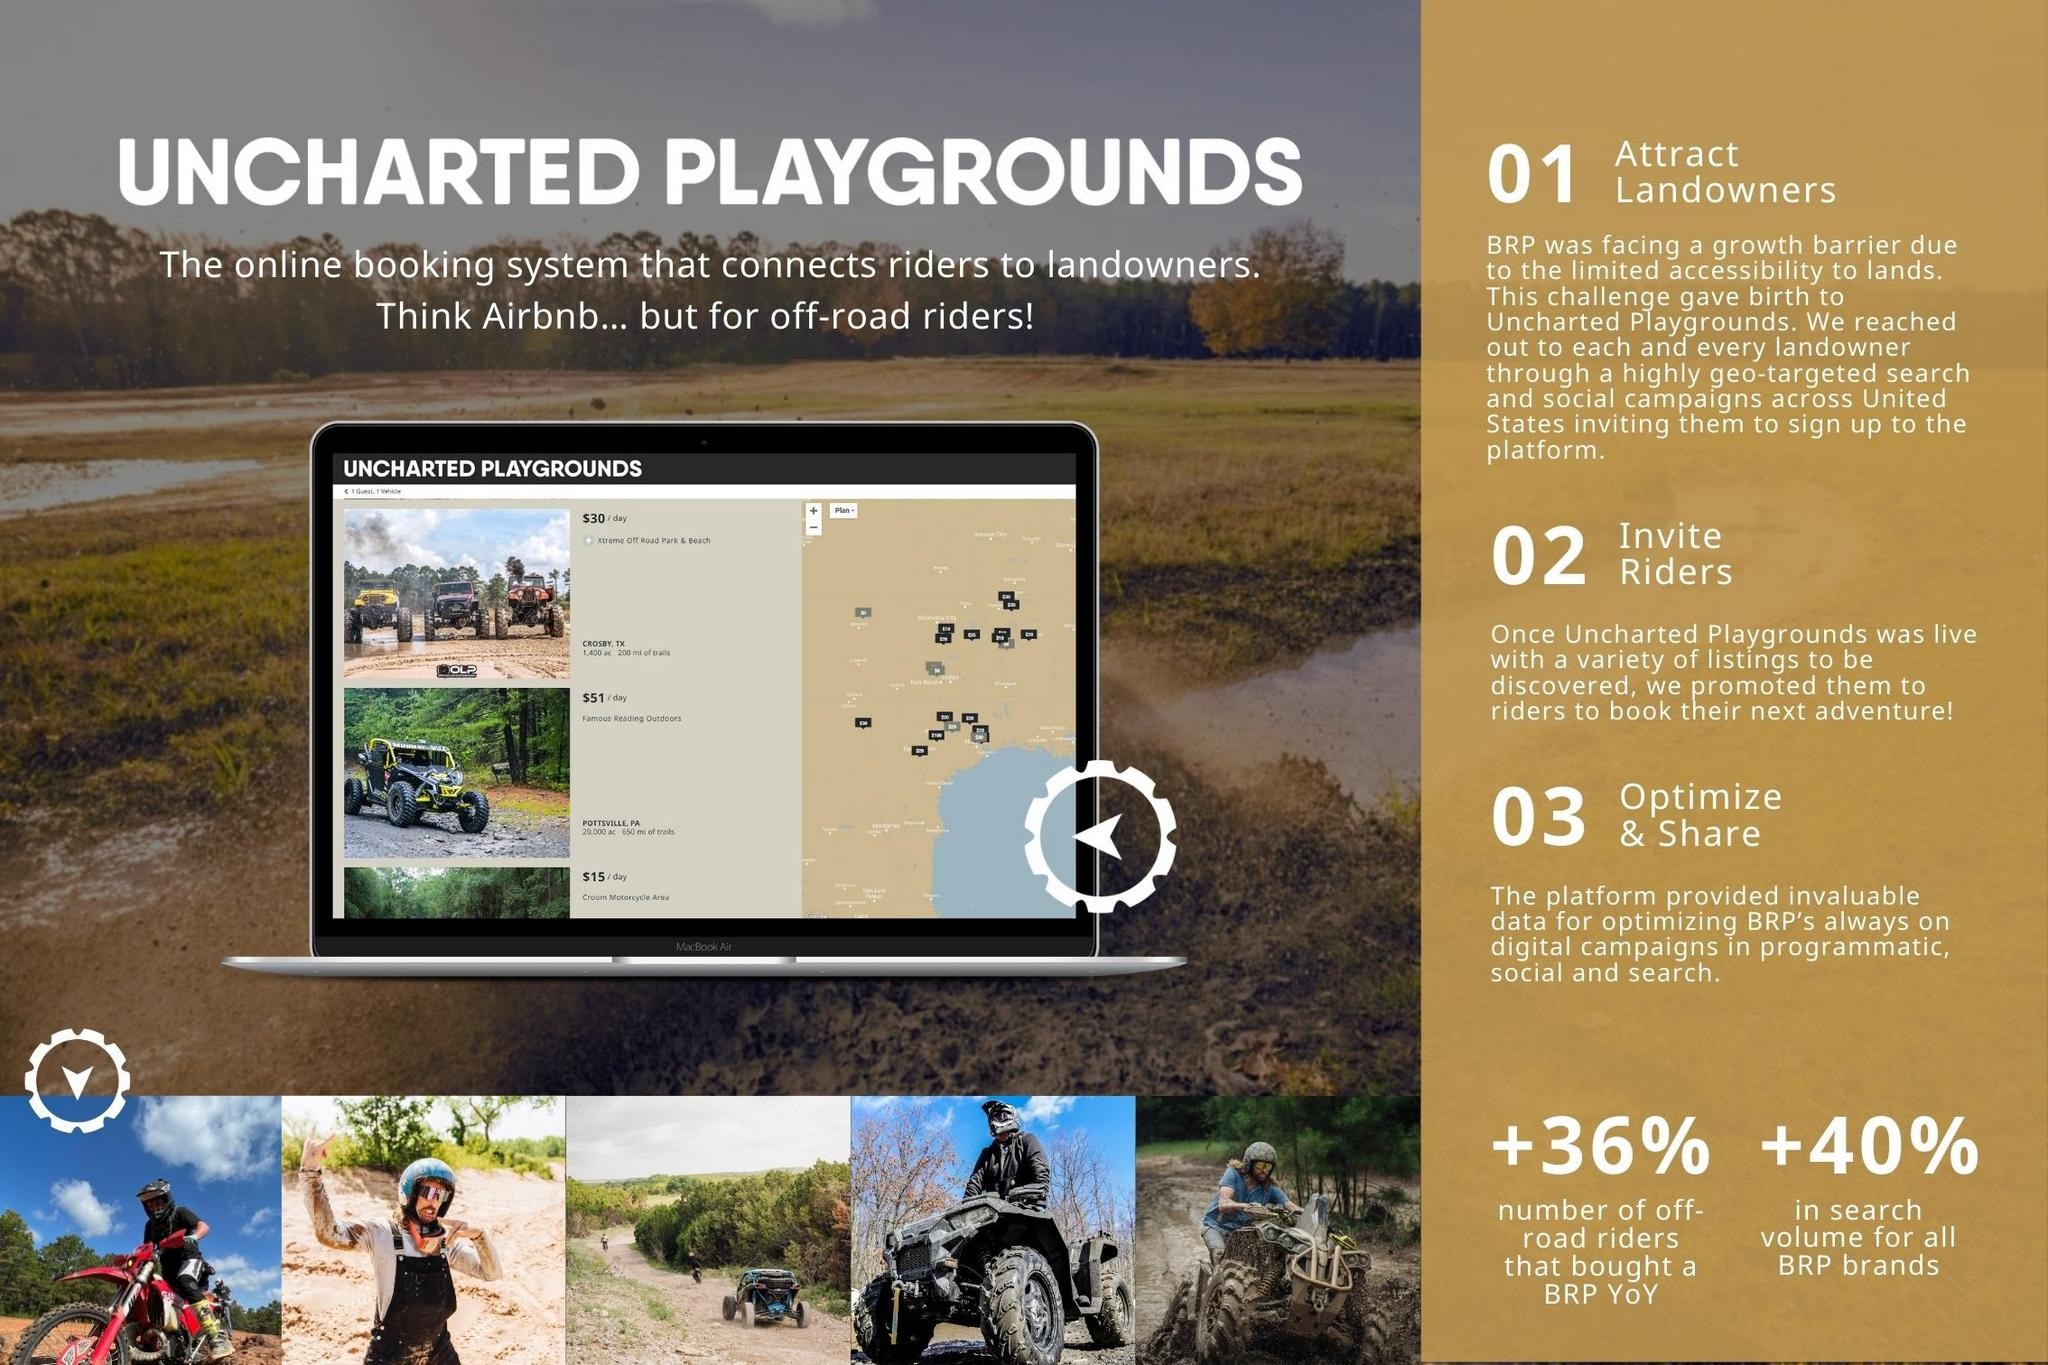 UNCHARTED PLAYGROUNDS